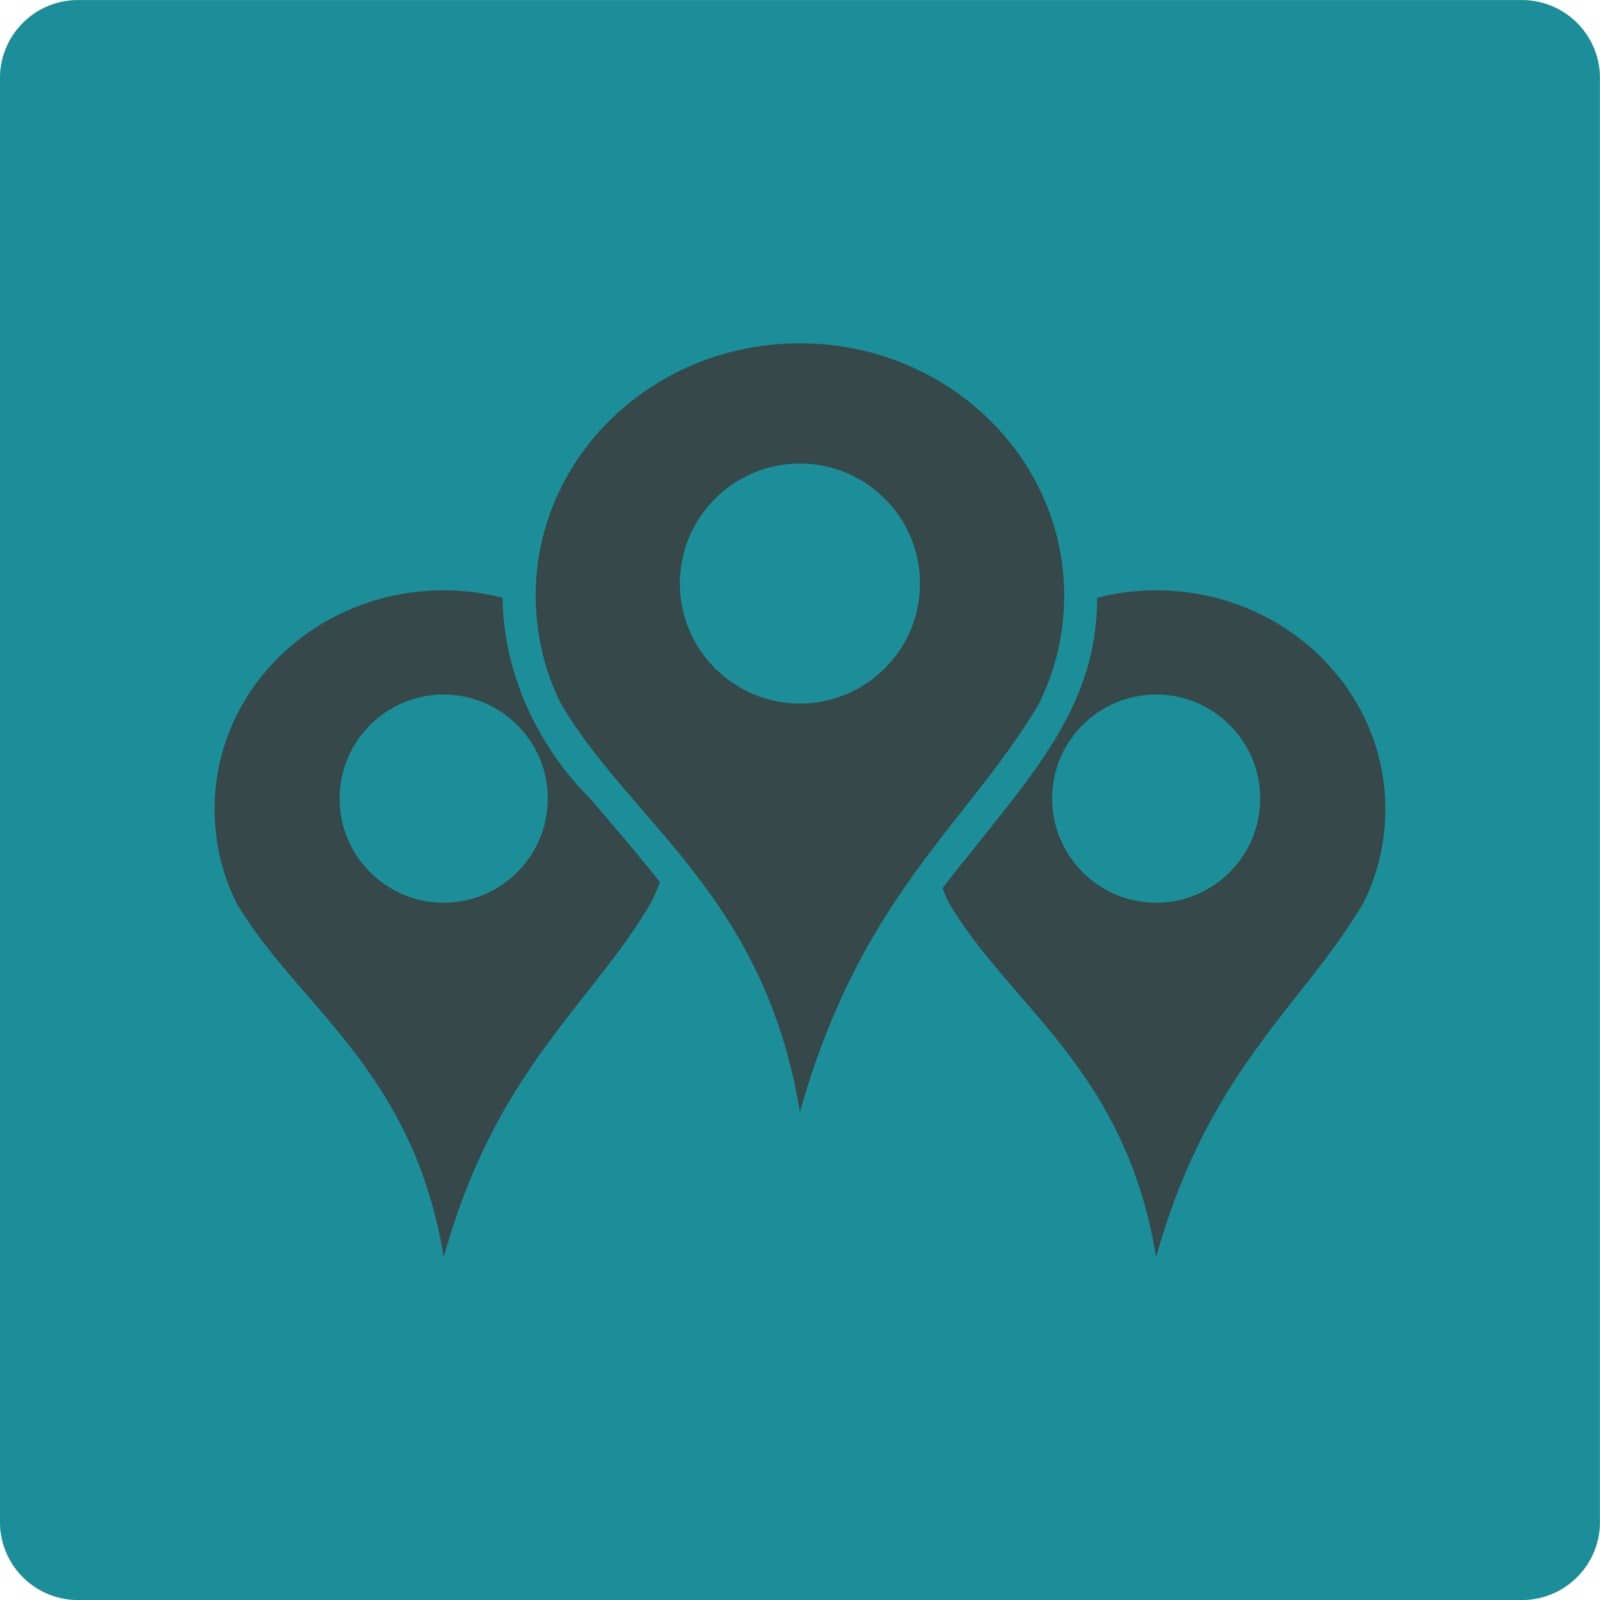 Locations vector icon. This flat rounded square button uses soft blue colors and isolated on a white background.